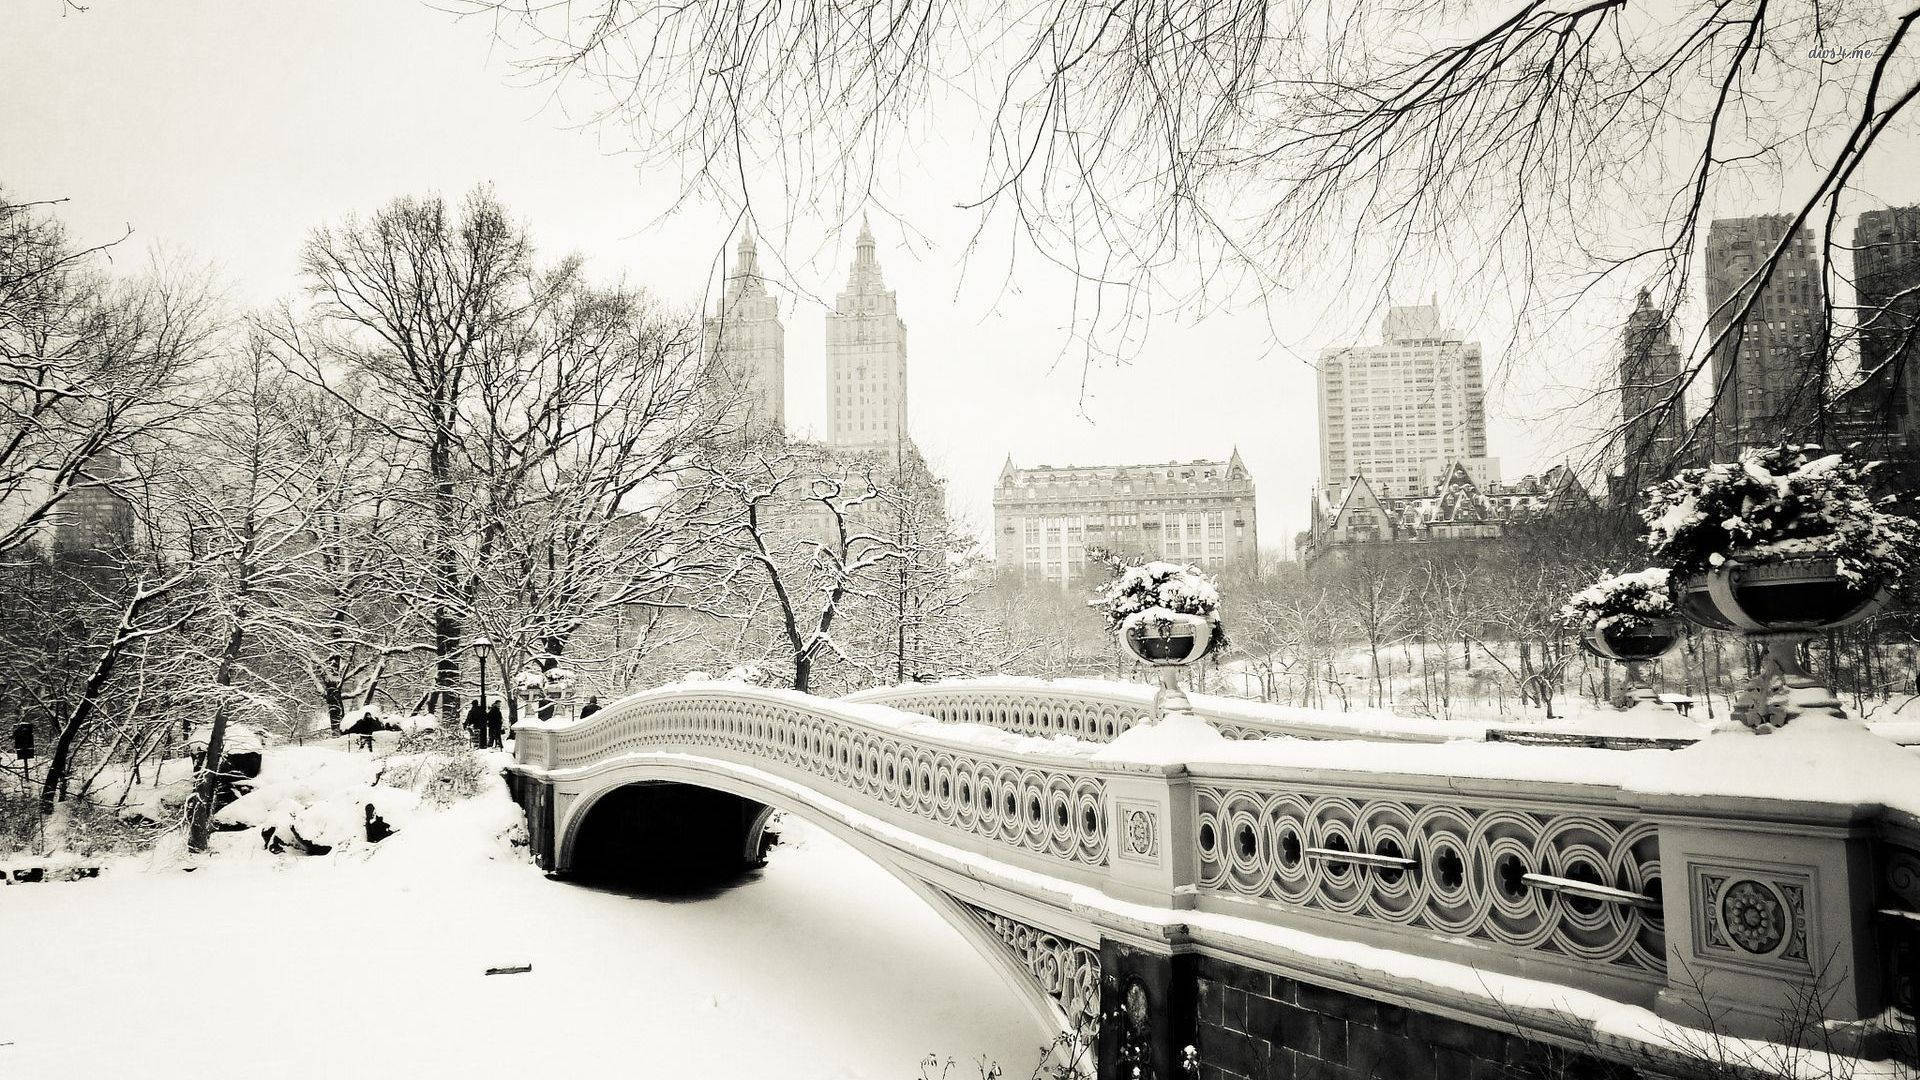 A bridge is covered in snow and ice - Snow, winter